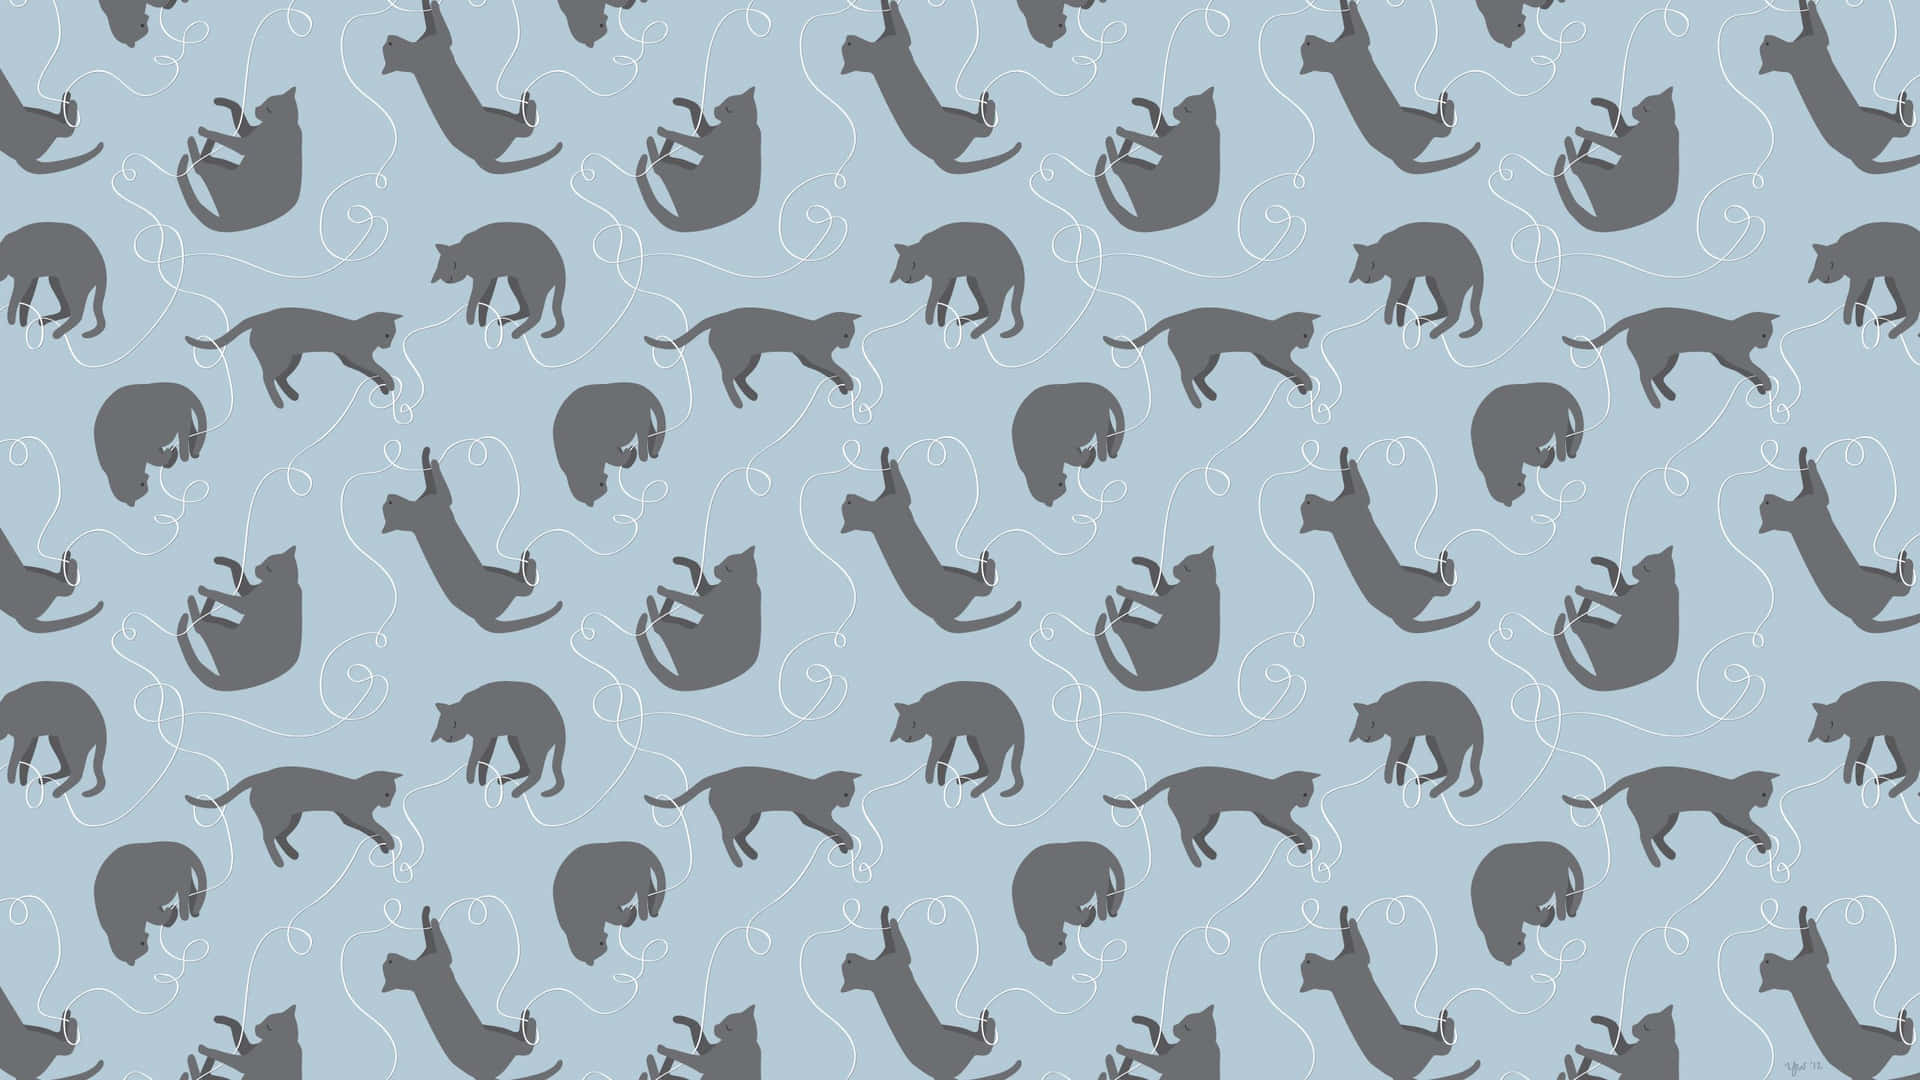 "A cute cat pattern - purrfectly adorable" Wallpaper